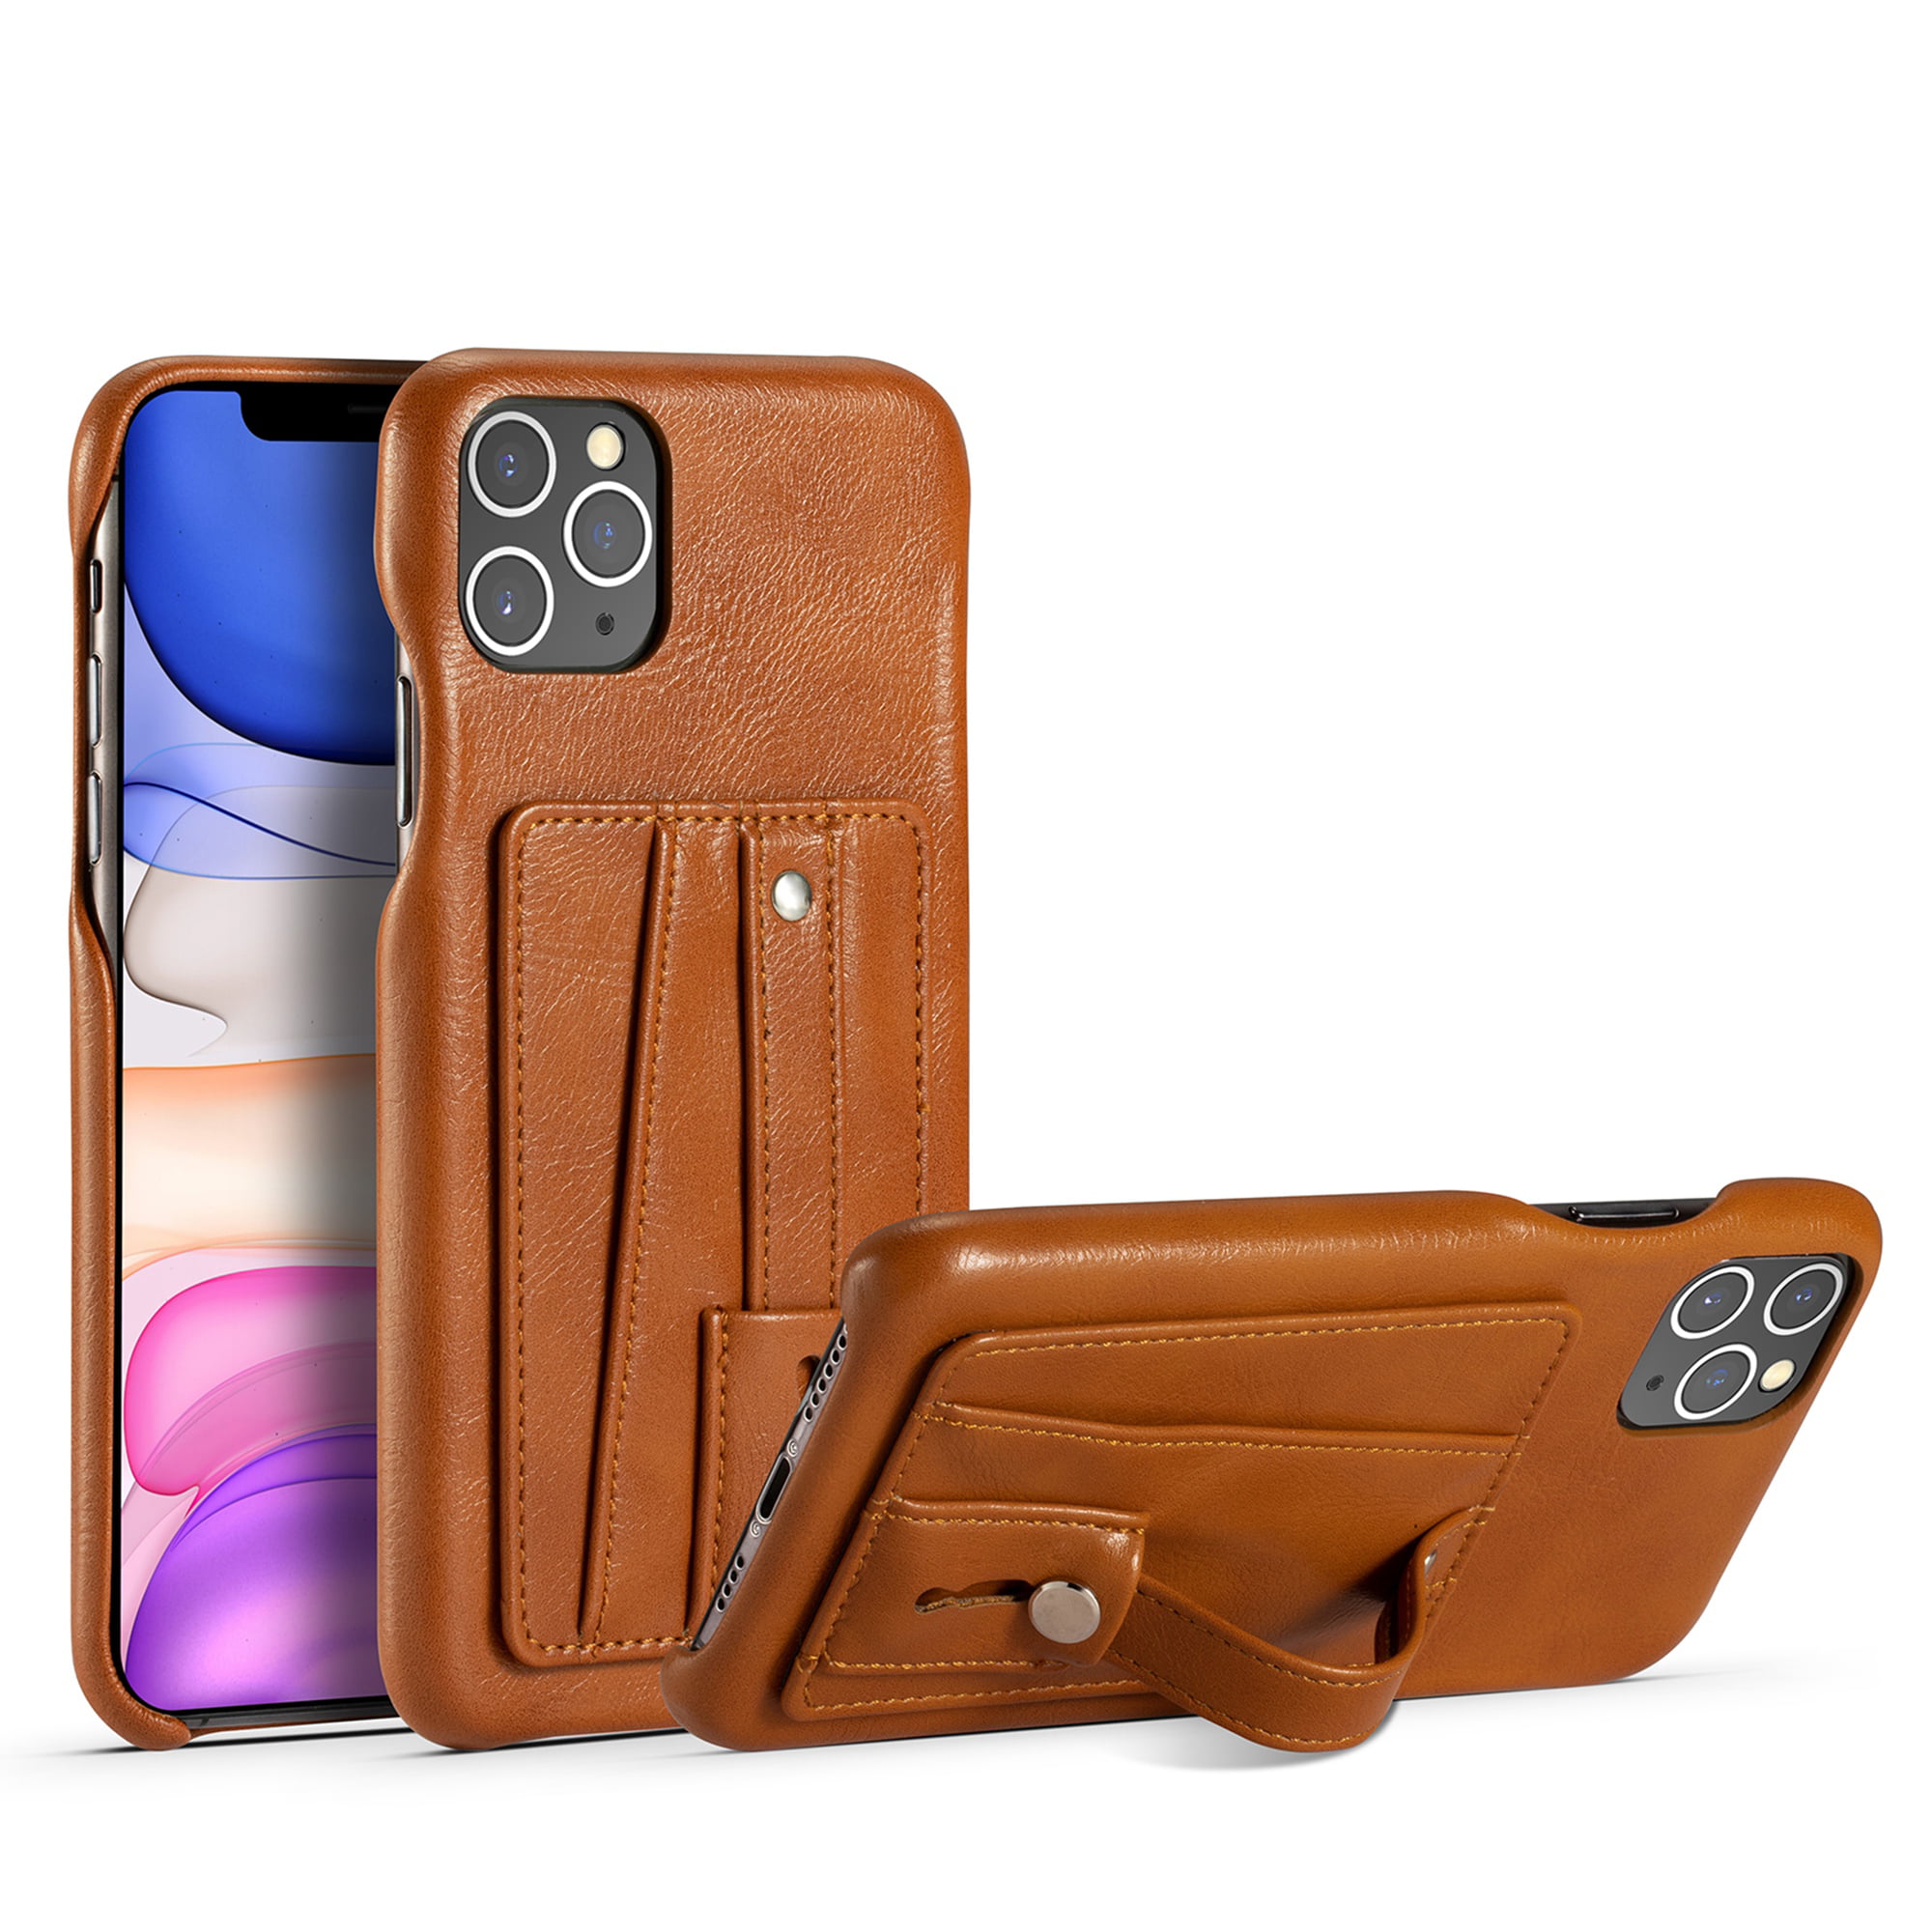 Dteck iPhone 11 Pro Case, Wallet Case For iPhone 11 Pro